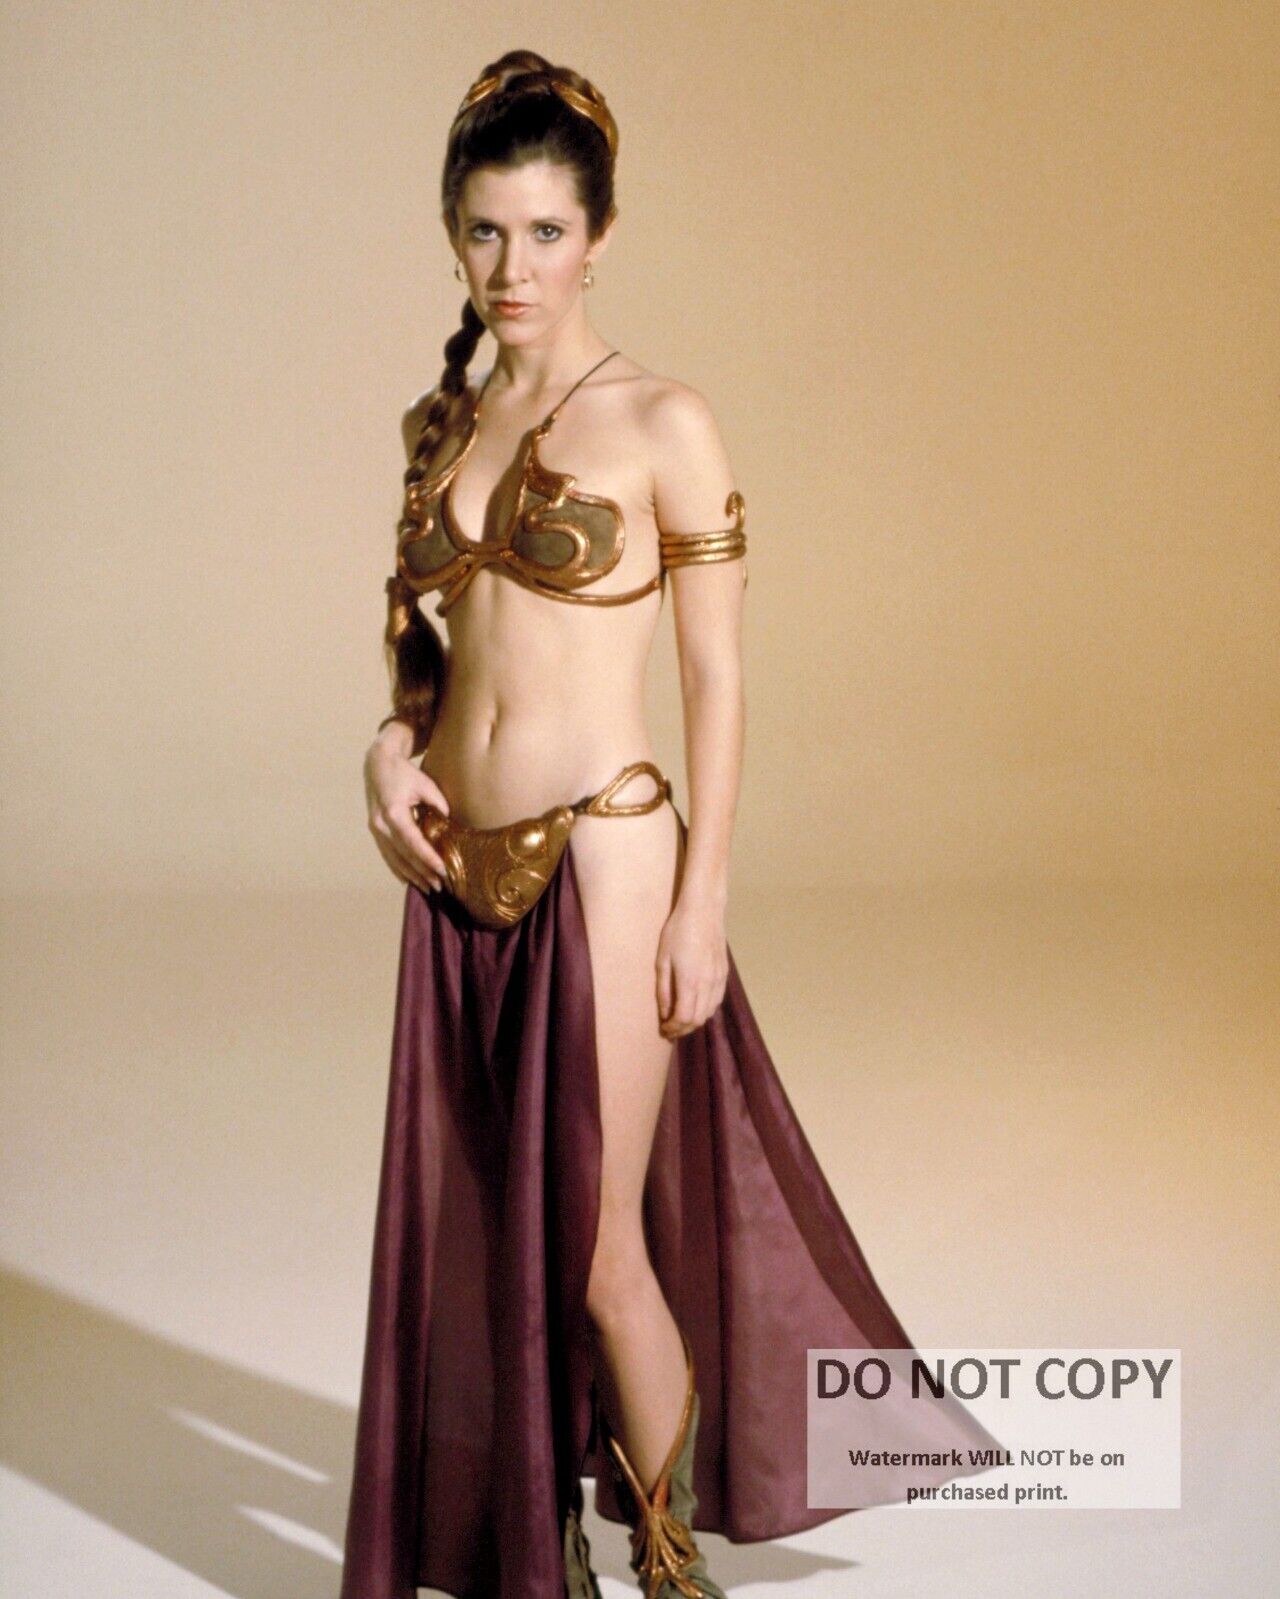 ACTRESS CARRIE FISHER PIN UP - 8X10 PUBLICITY PHOTO (MW164)